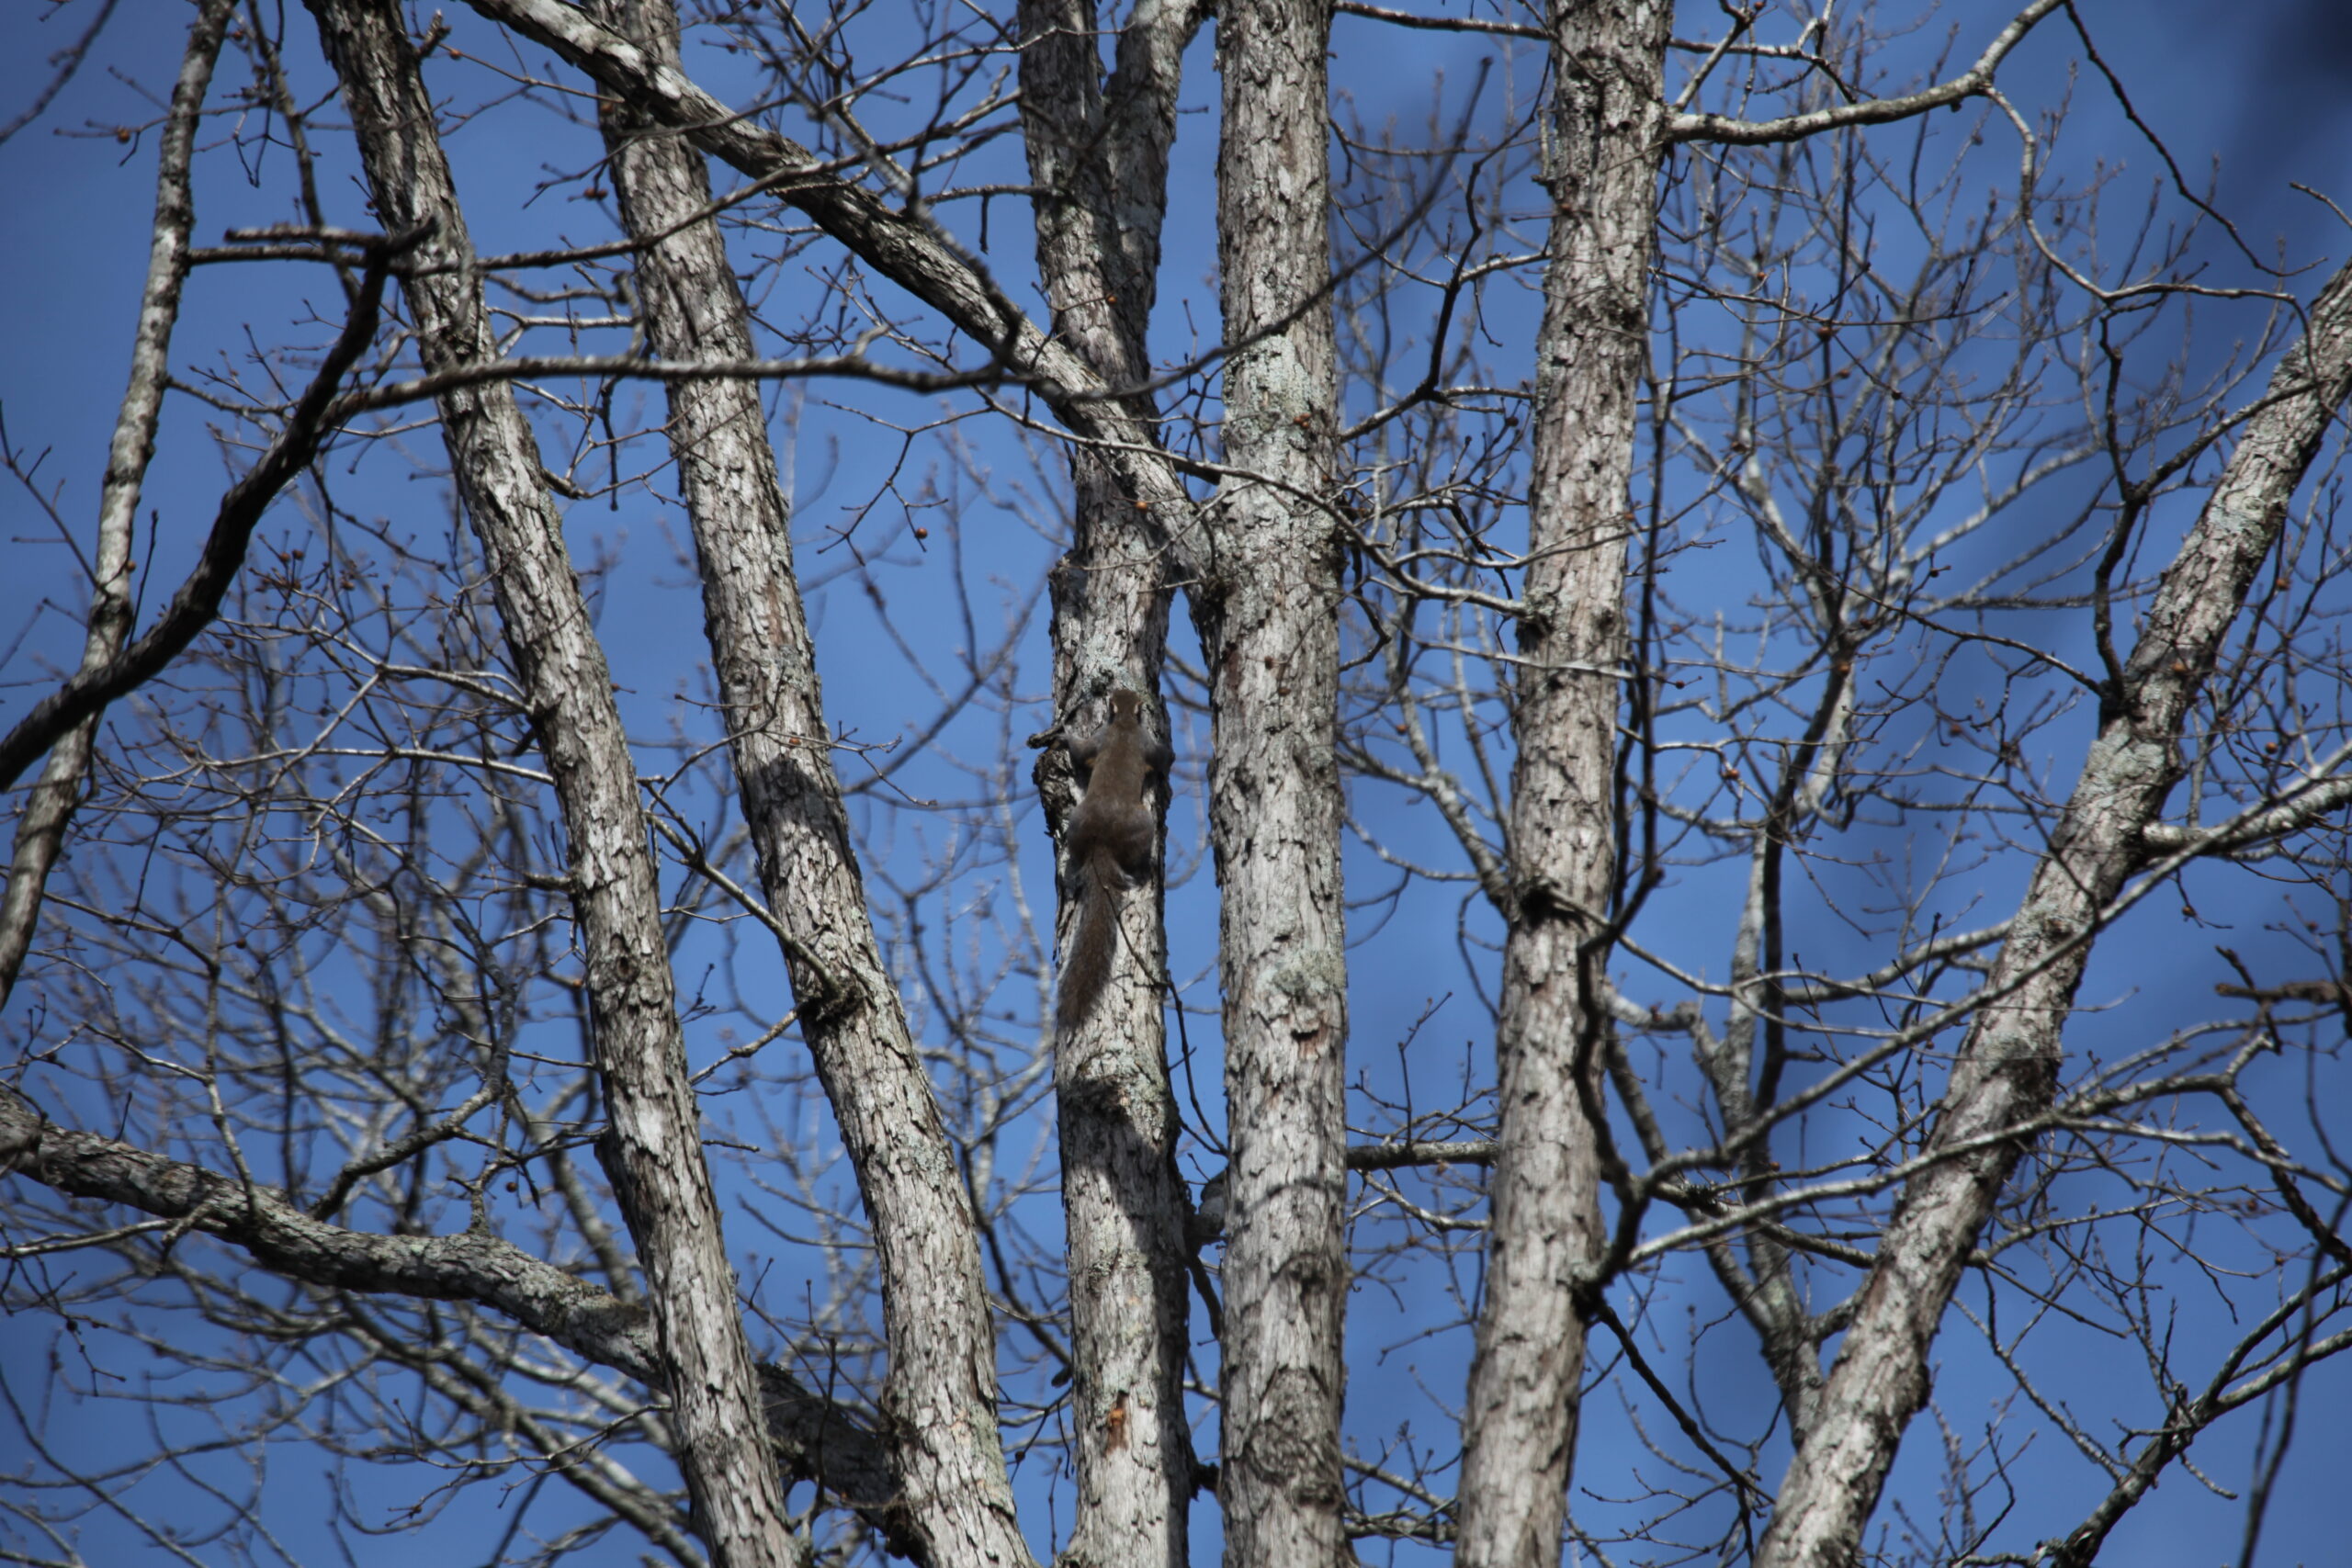 Squirrel in a tree with no leaves.